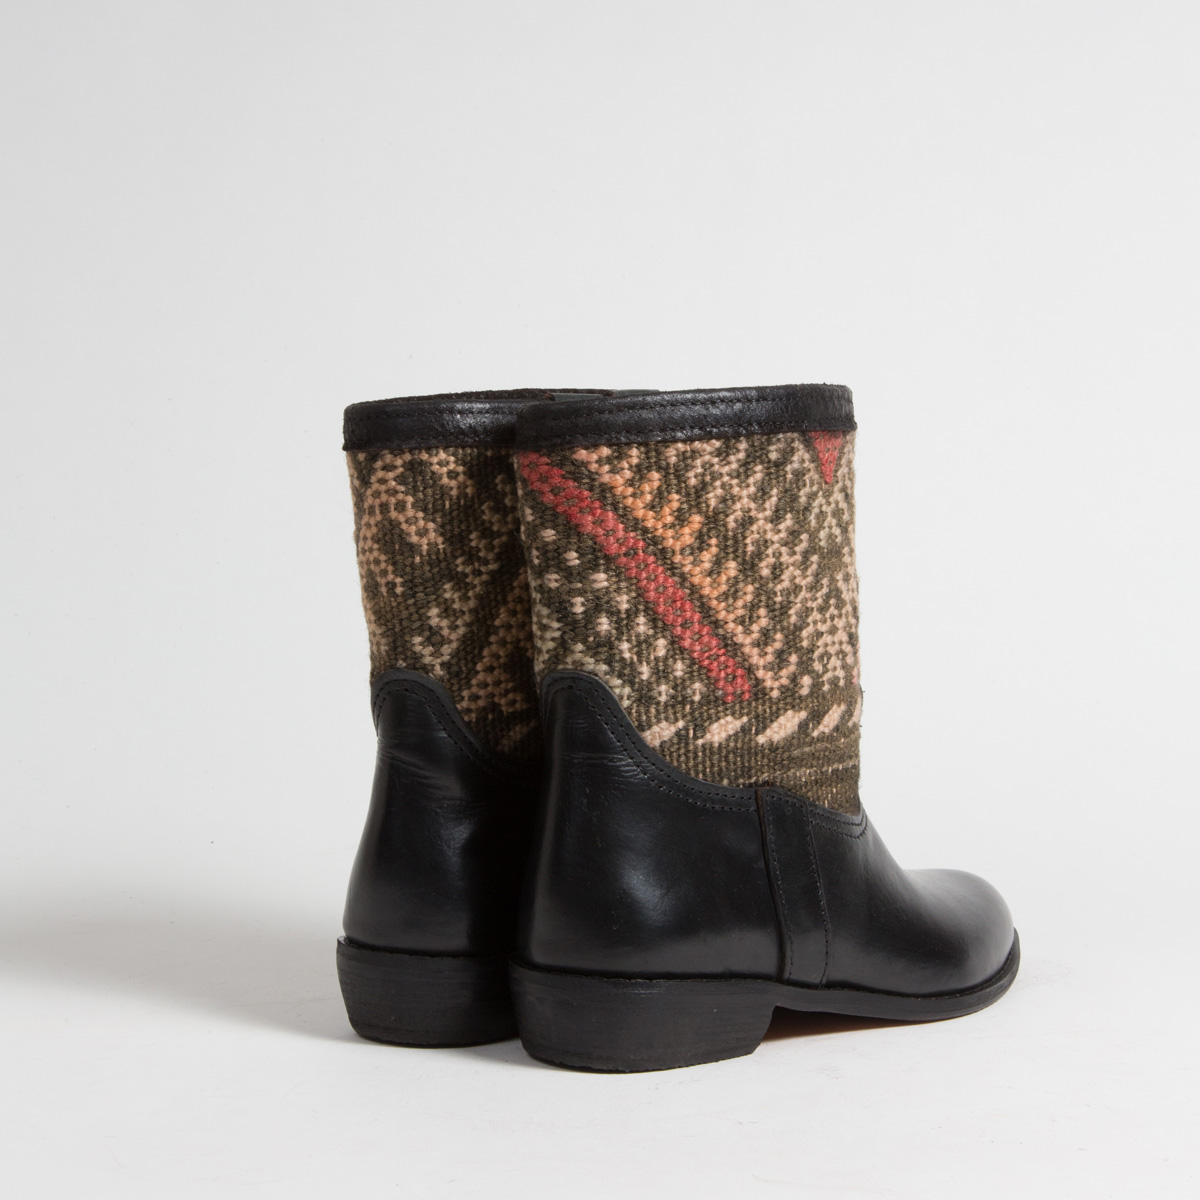 Bottines Kilim cuir mababouche artisanales (Réf. RPN11-38)